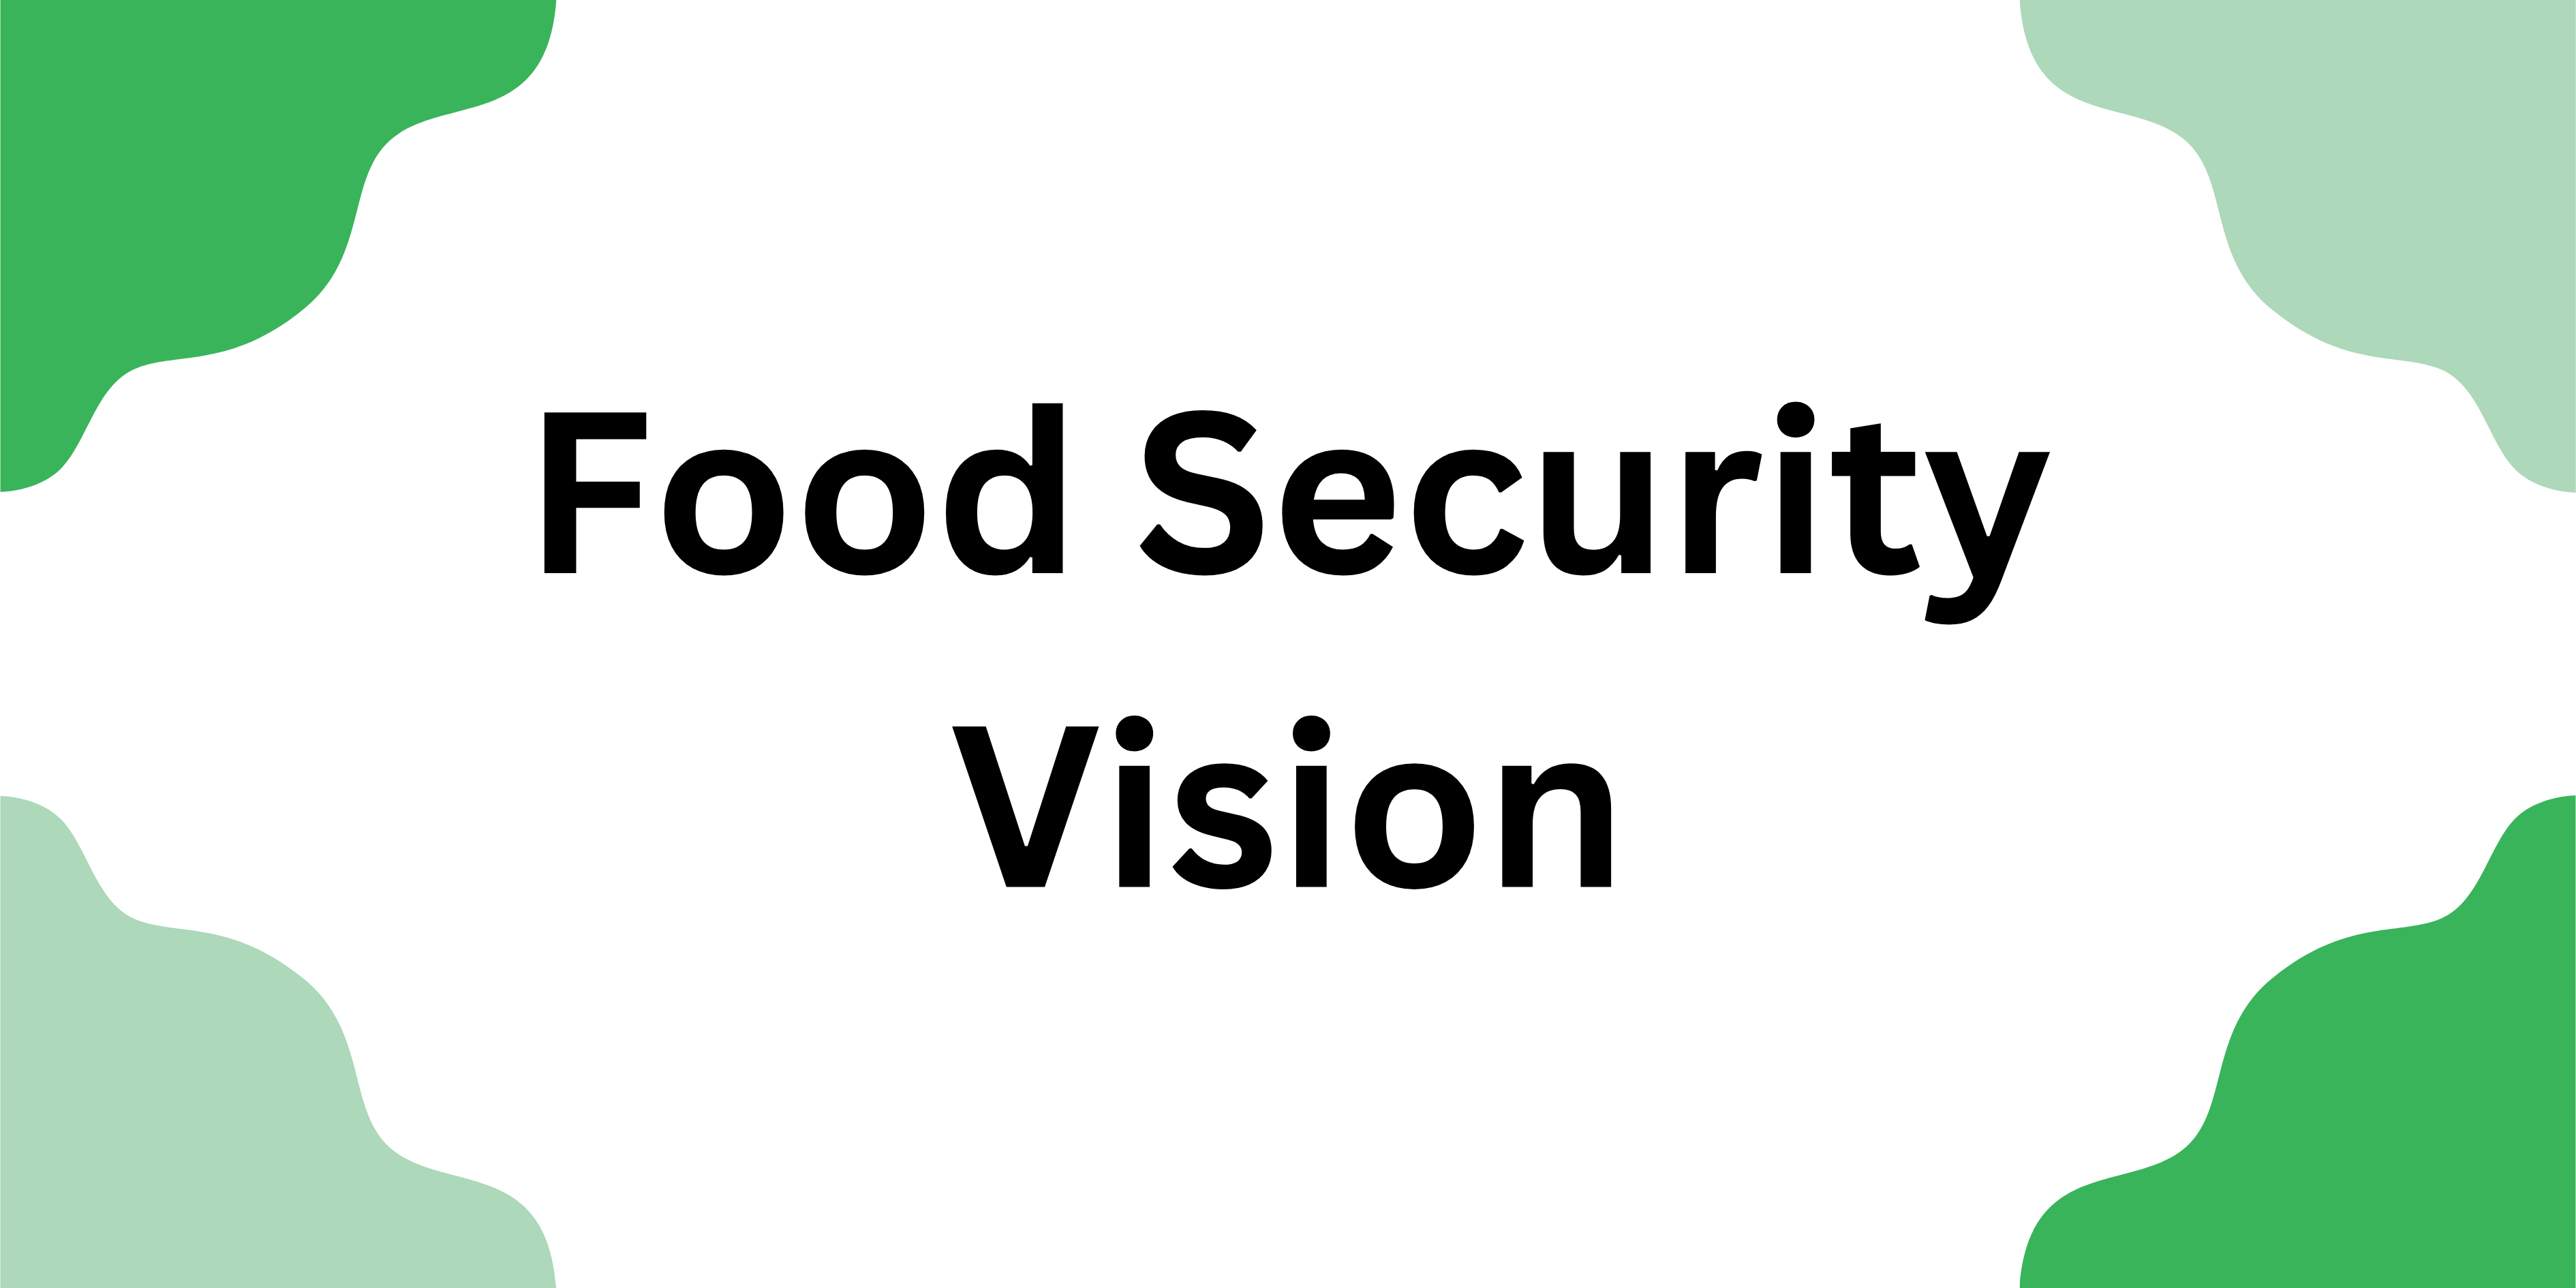 Food Security Vision